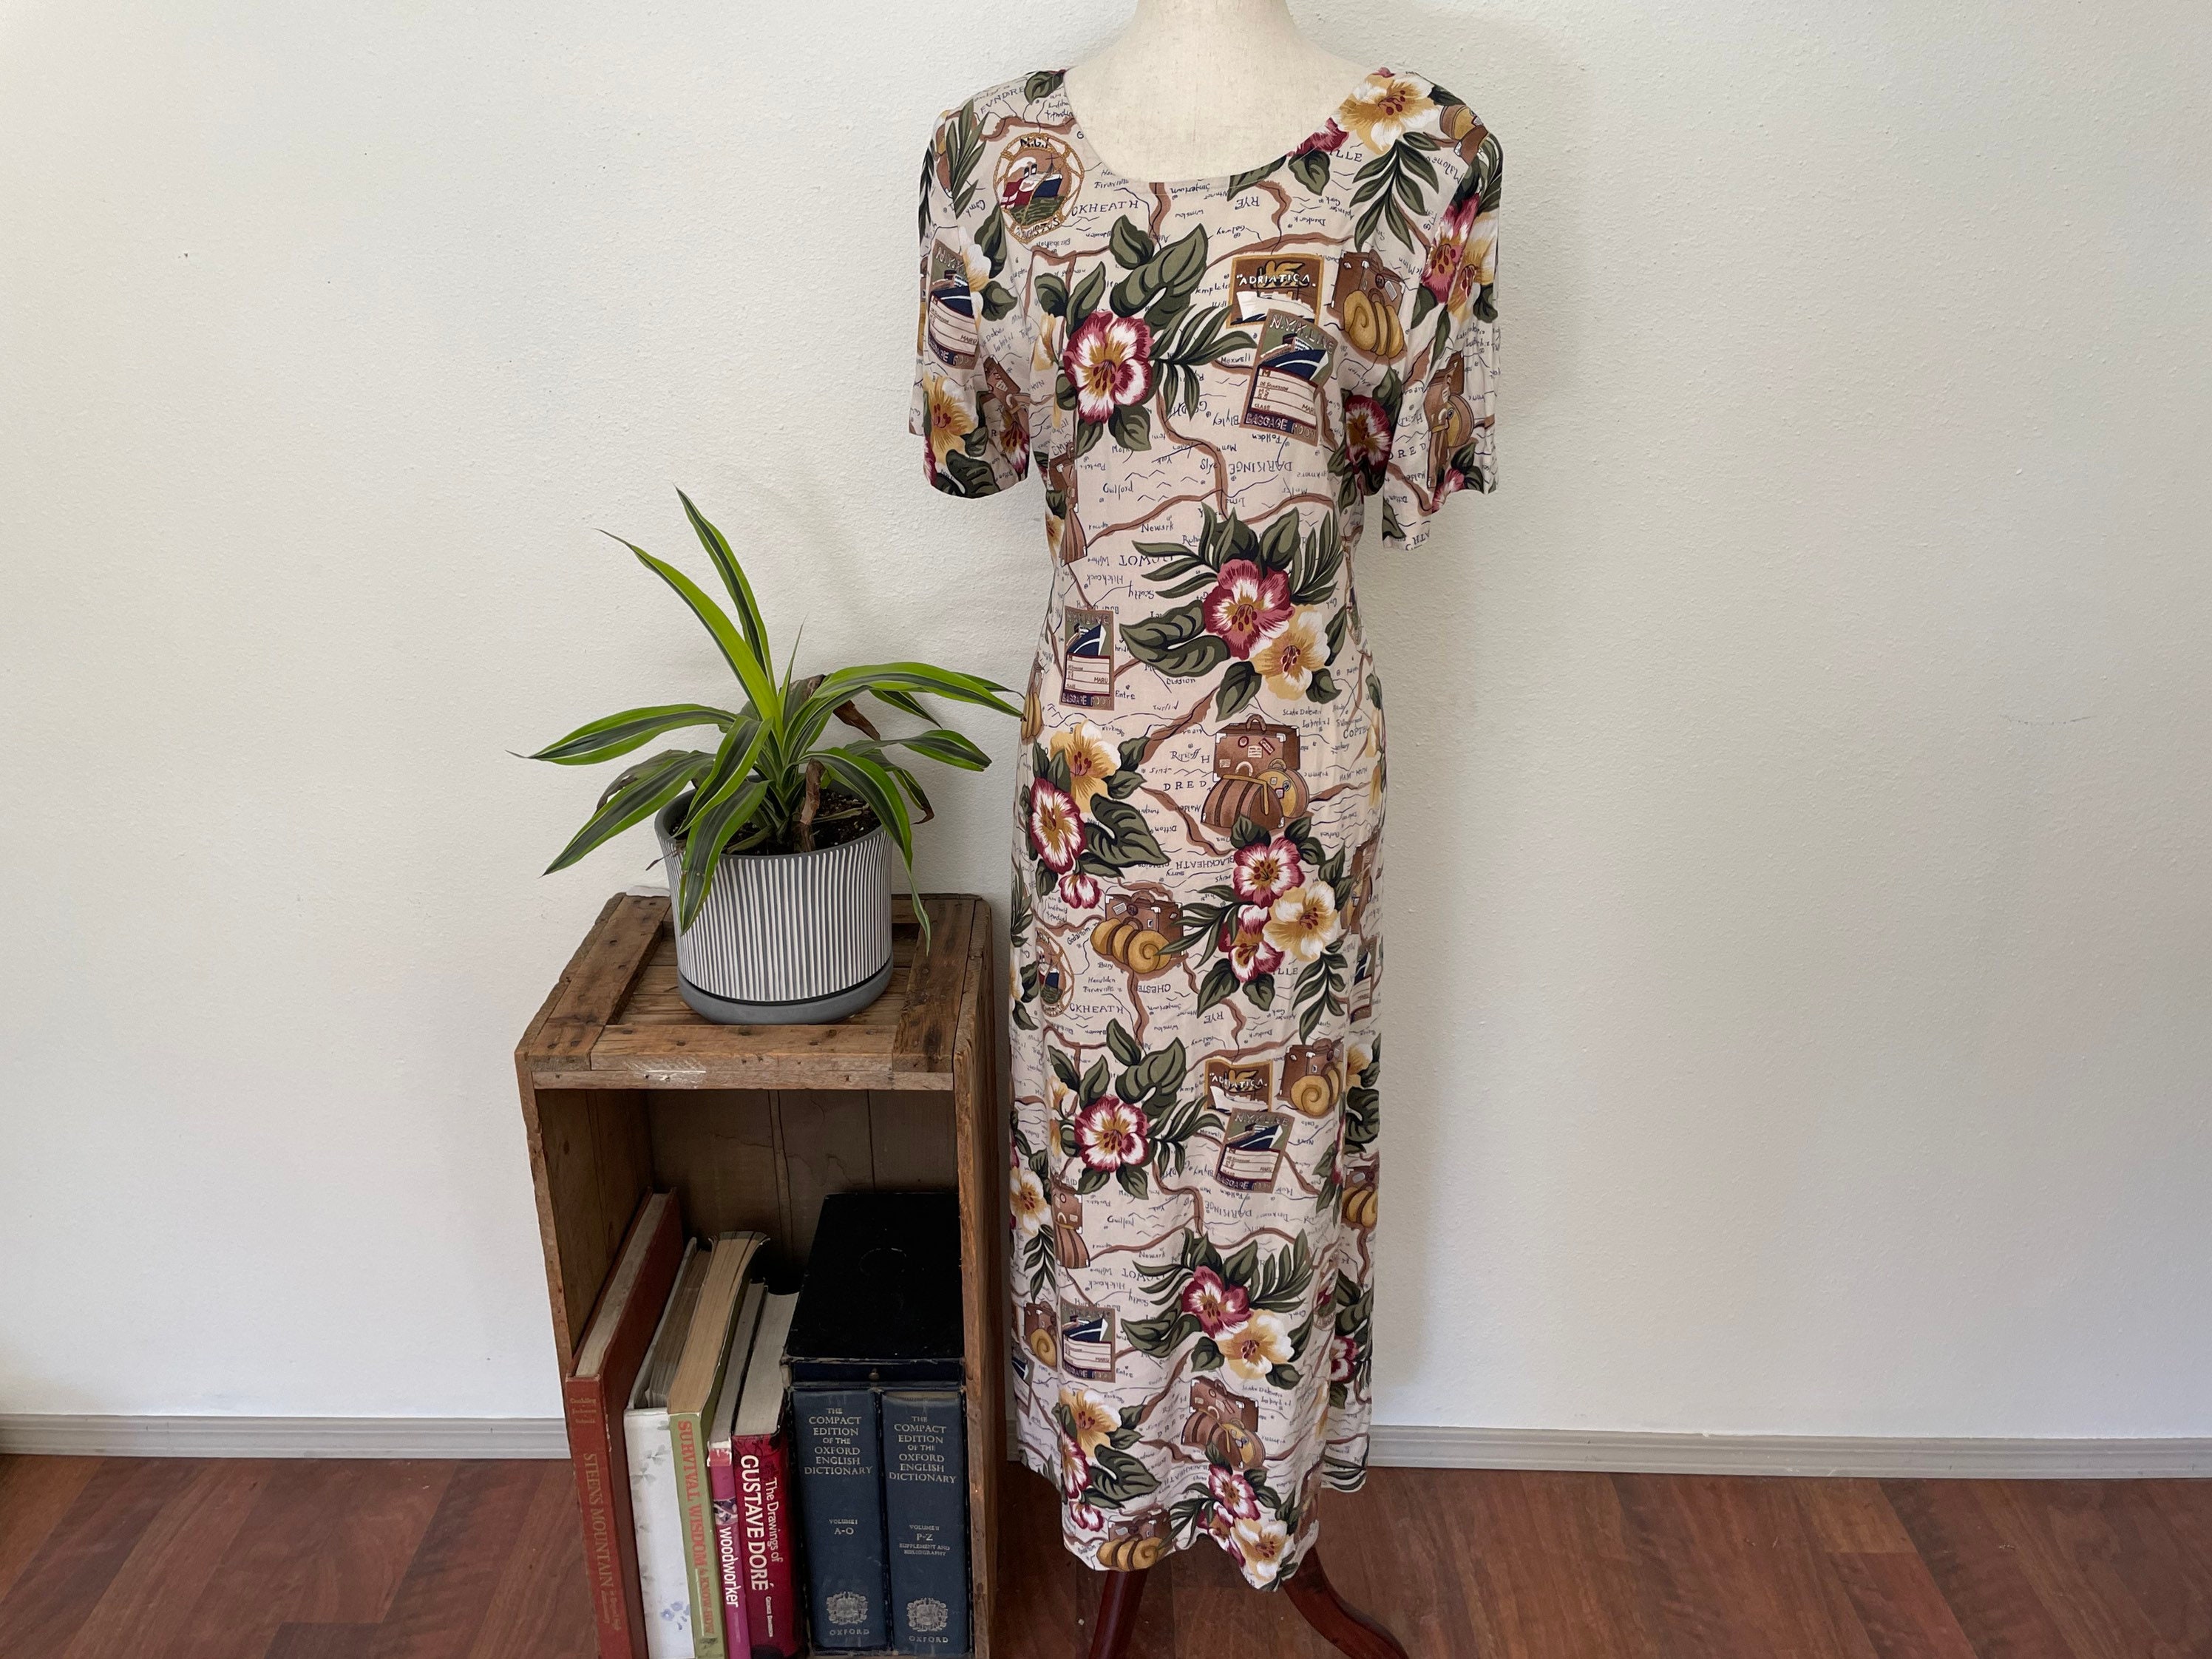 SerendipityvintageOR 90's Rayon Novelty Print Vacation Dress. Hawaii. Steamer Trunks. Teddi Brand Soft and Comfy Cottagecore Style Midi Dress. Size L Cruise Gown